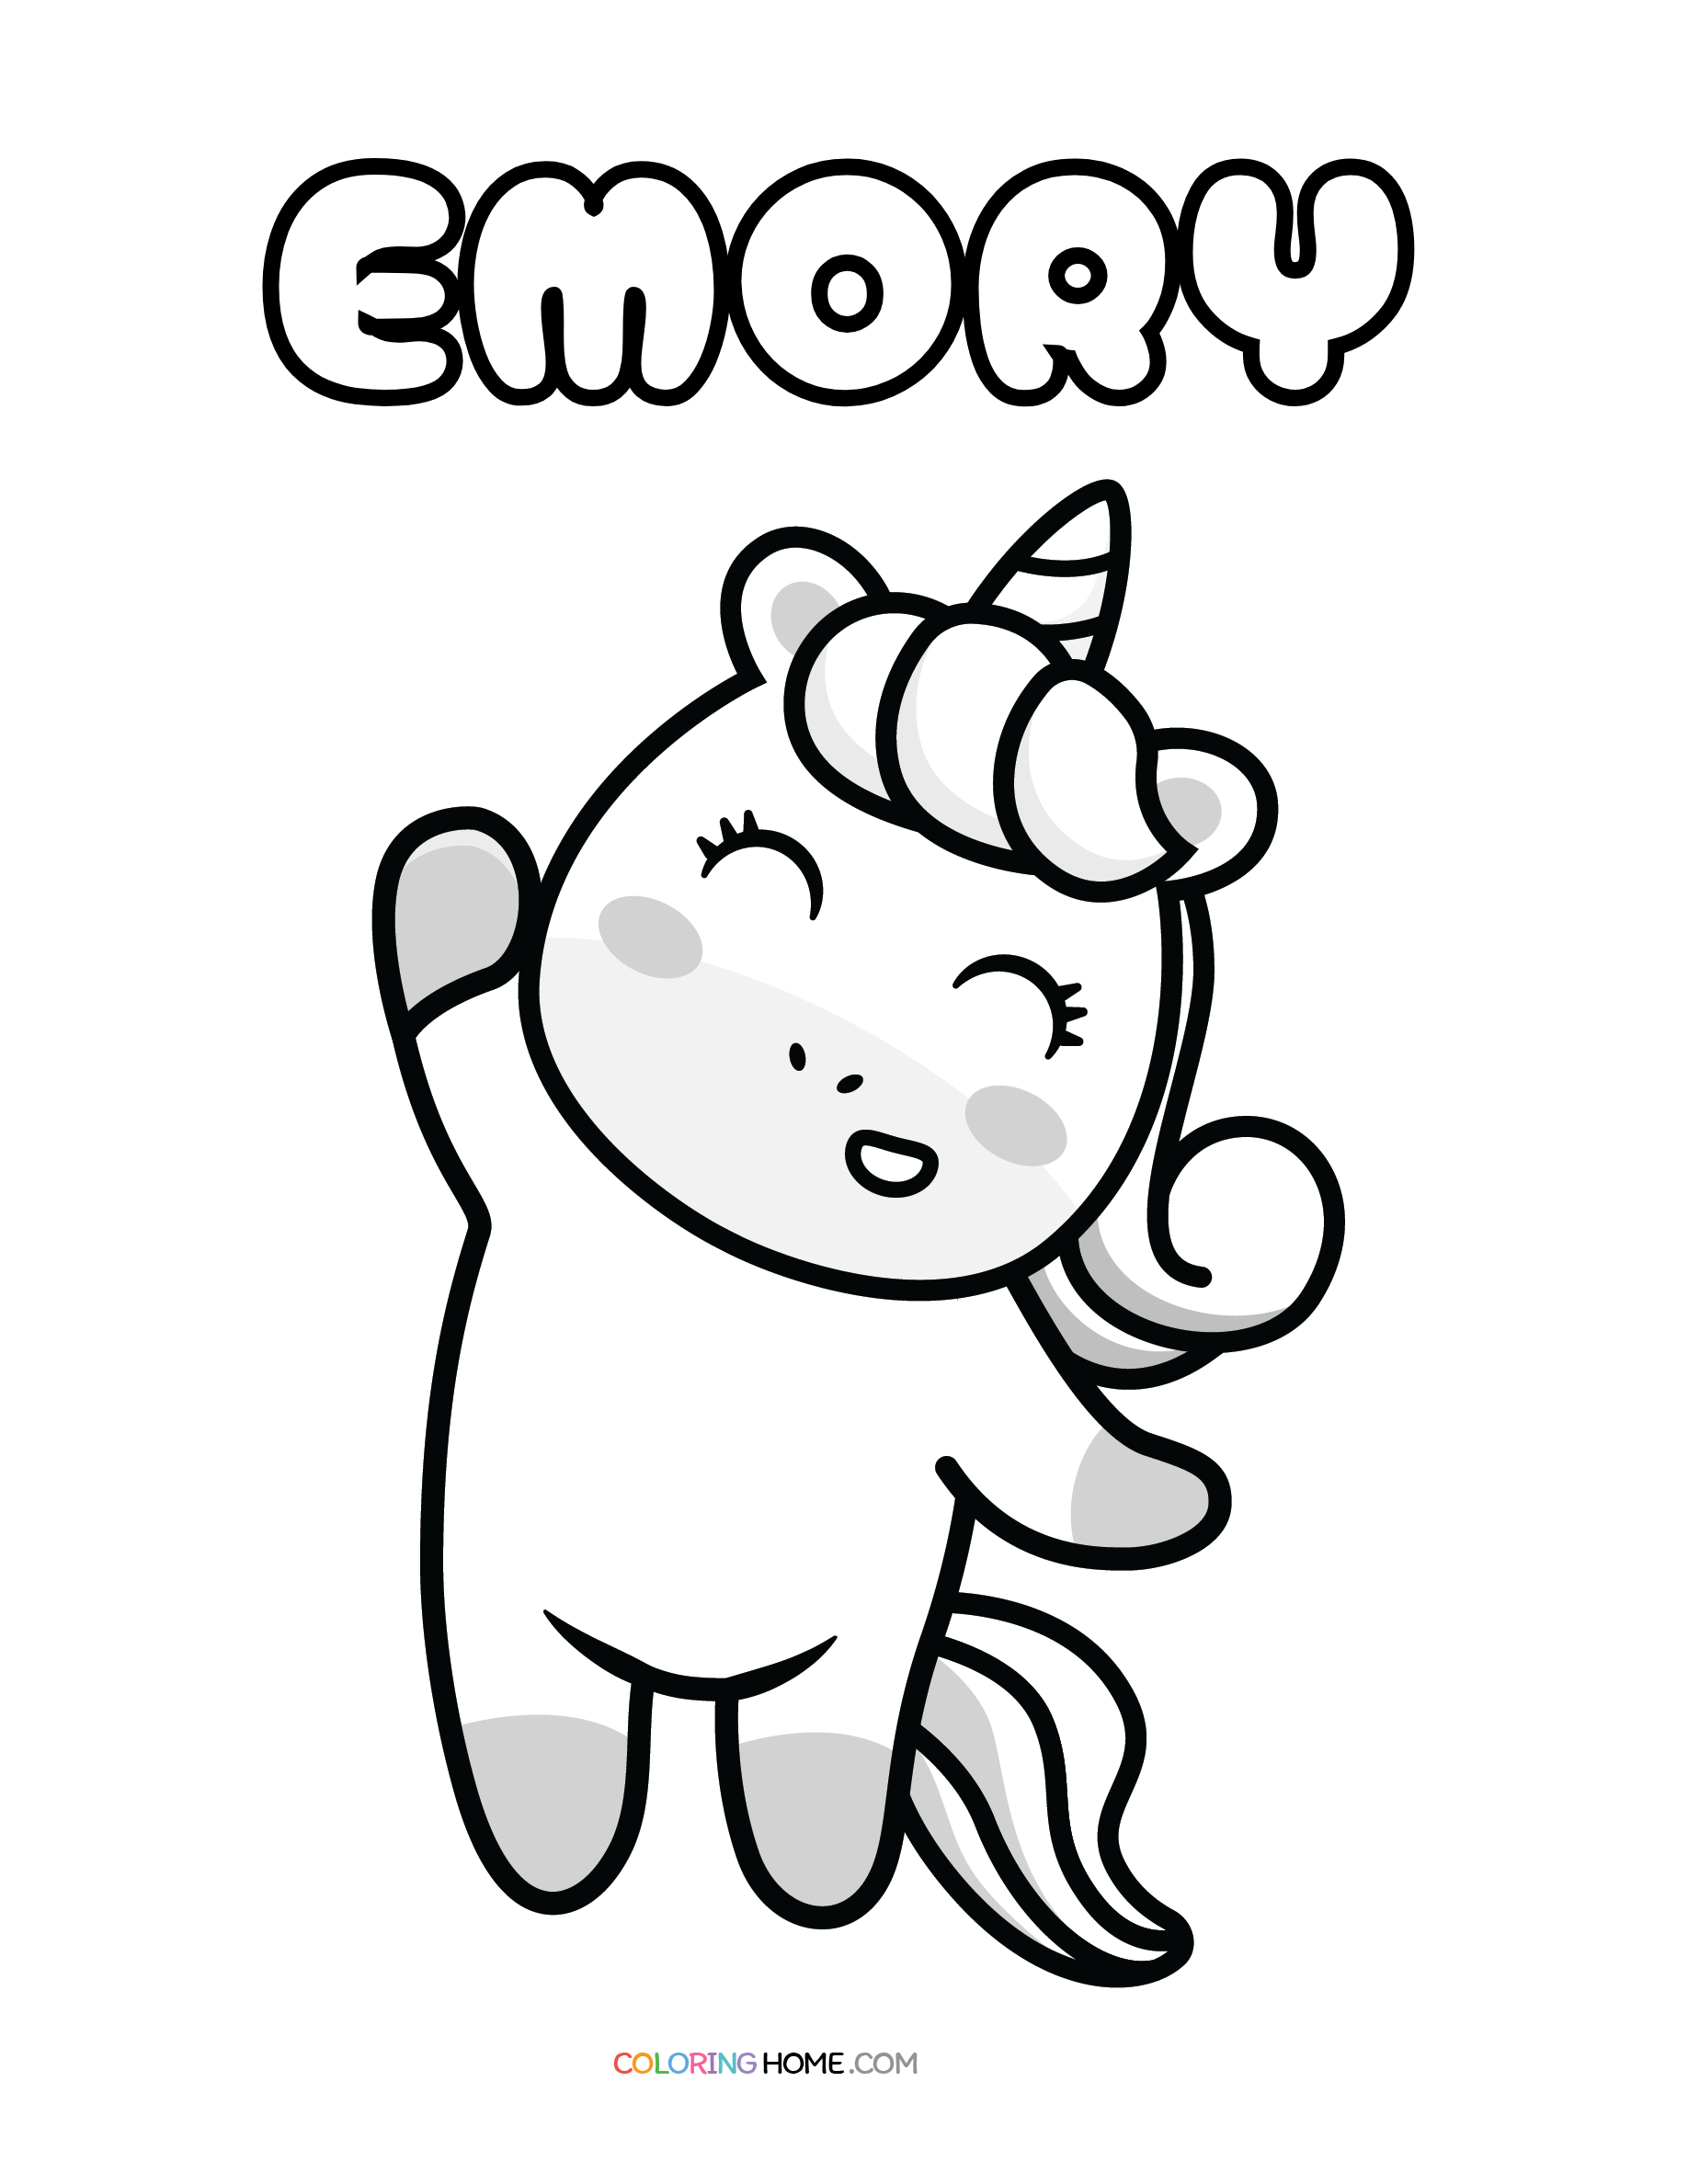 Emory unicorn coloring page